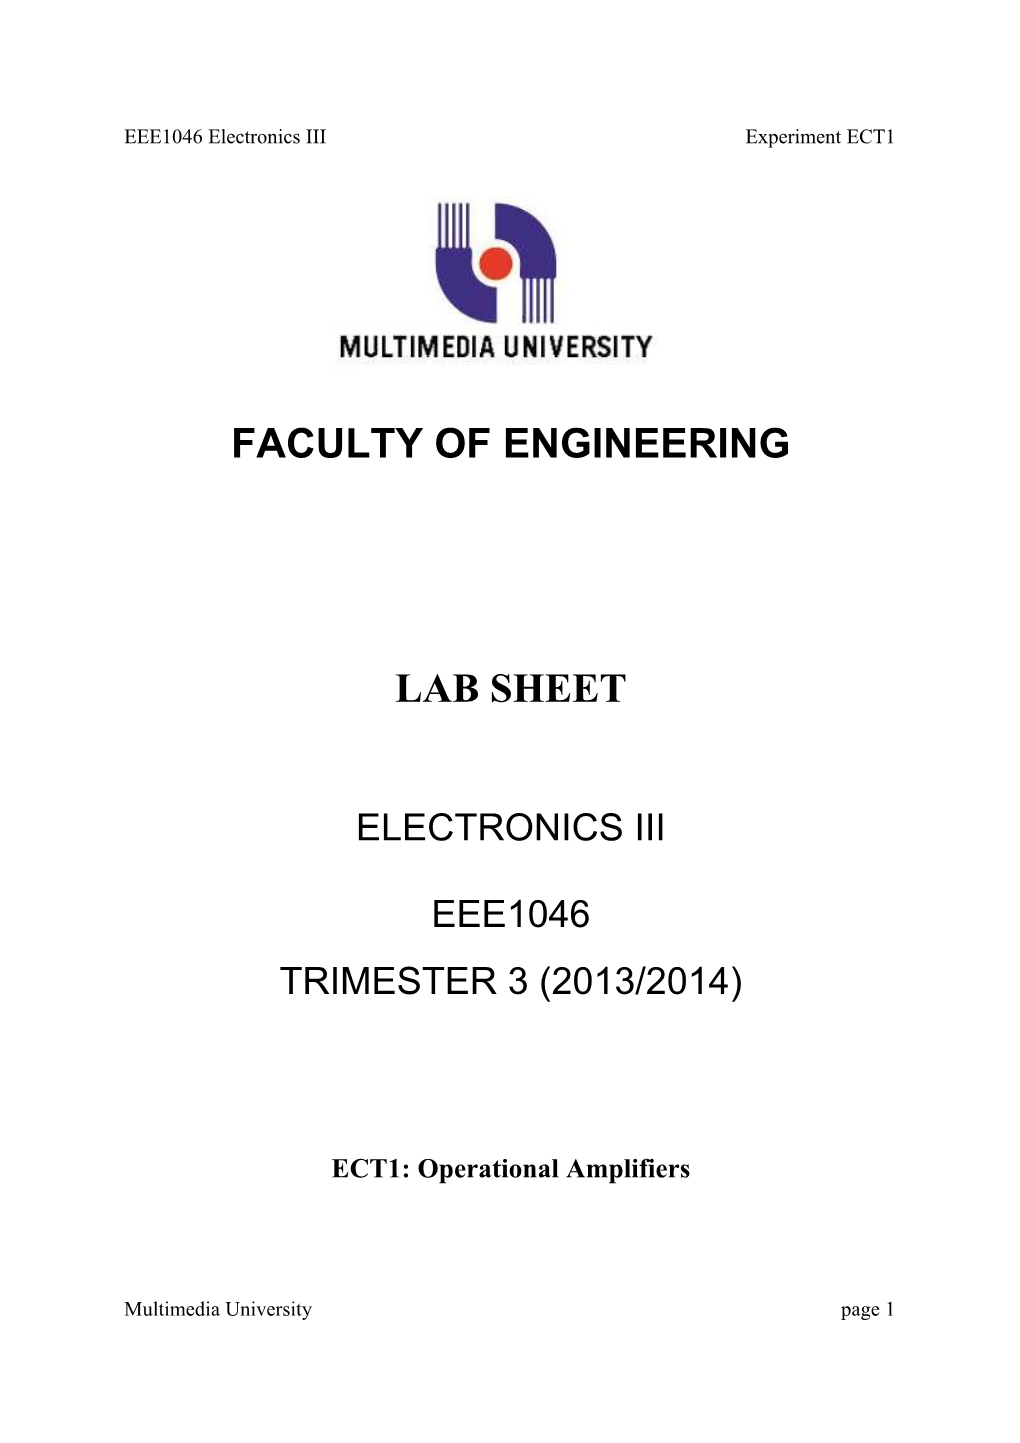 Faculty of Engineering s5